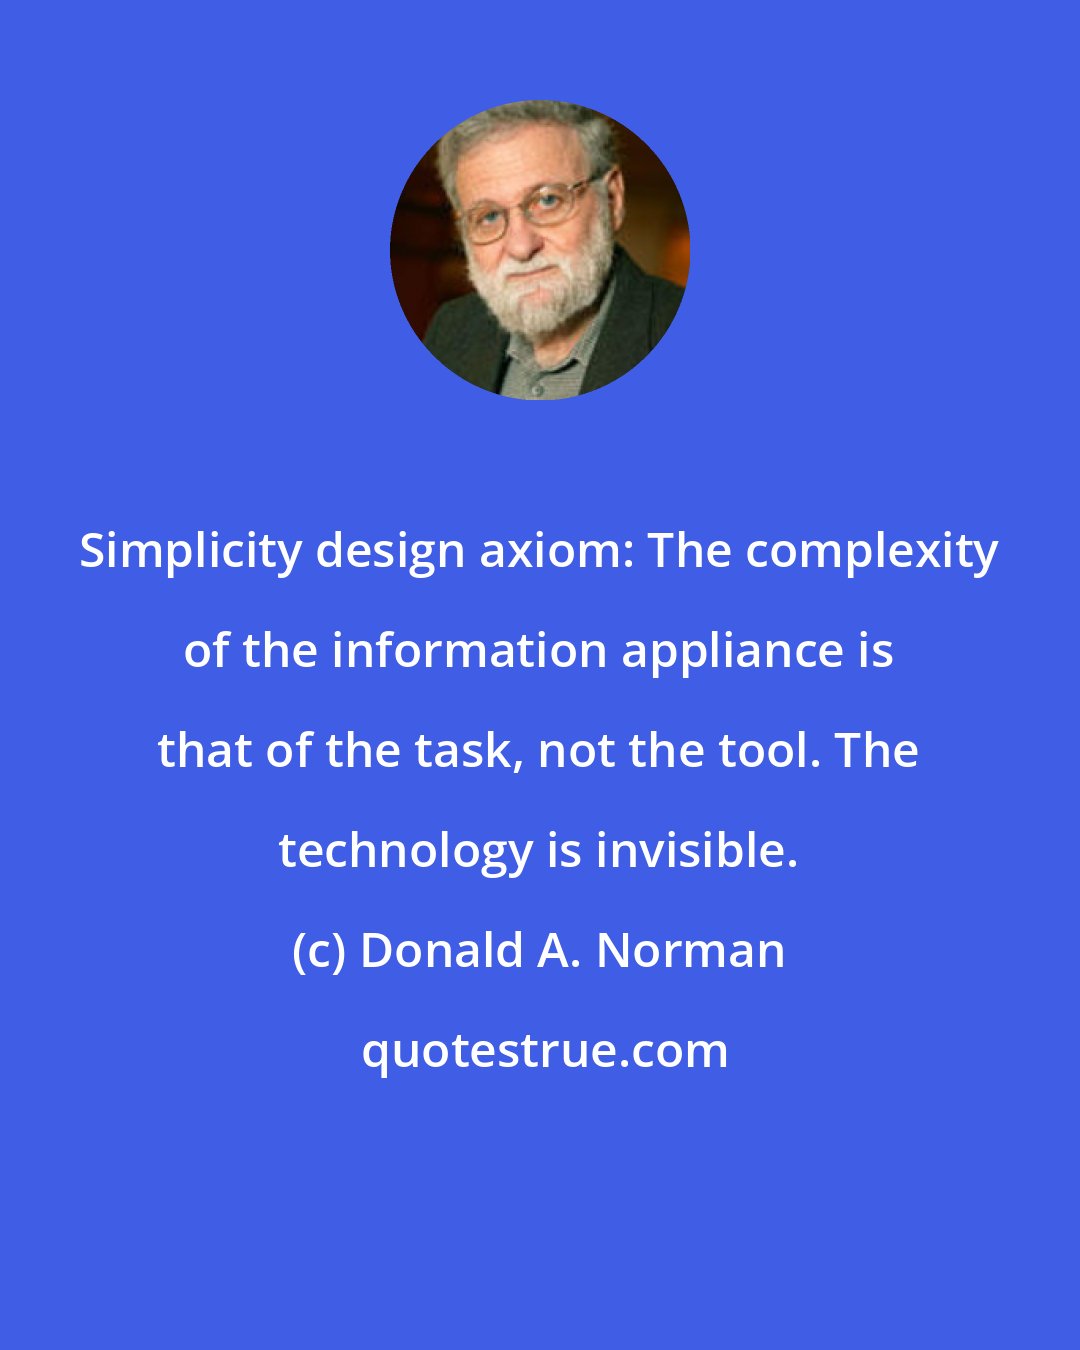 Donald A. Norman: Simplicity design axiom: The complexity of the information appliance is that of the task, not the tool. The technology is invisible.